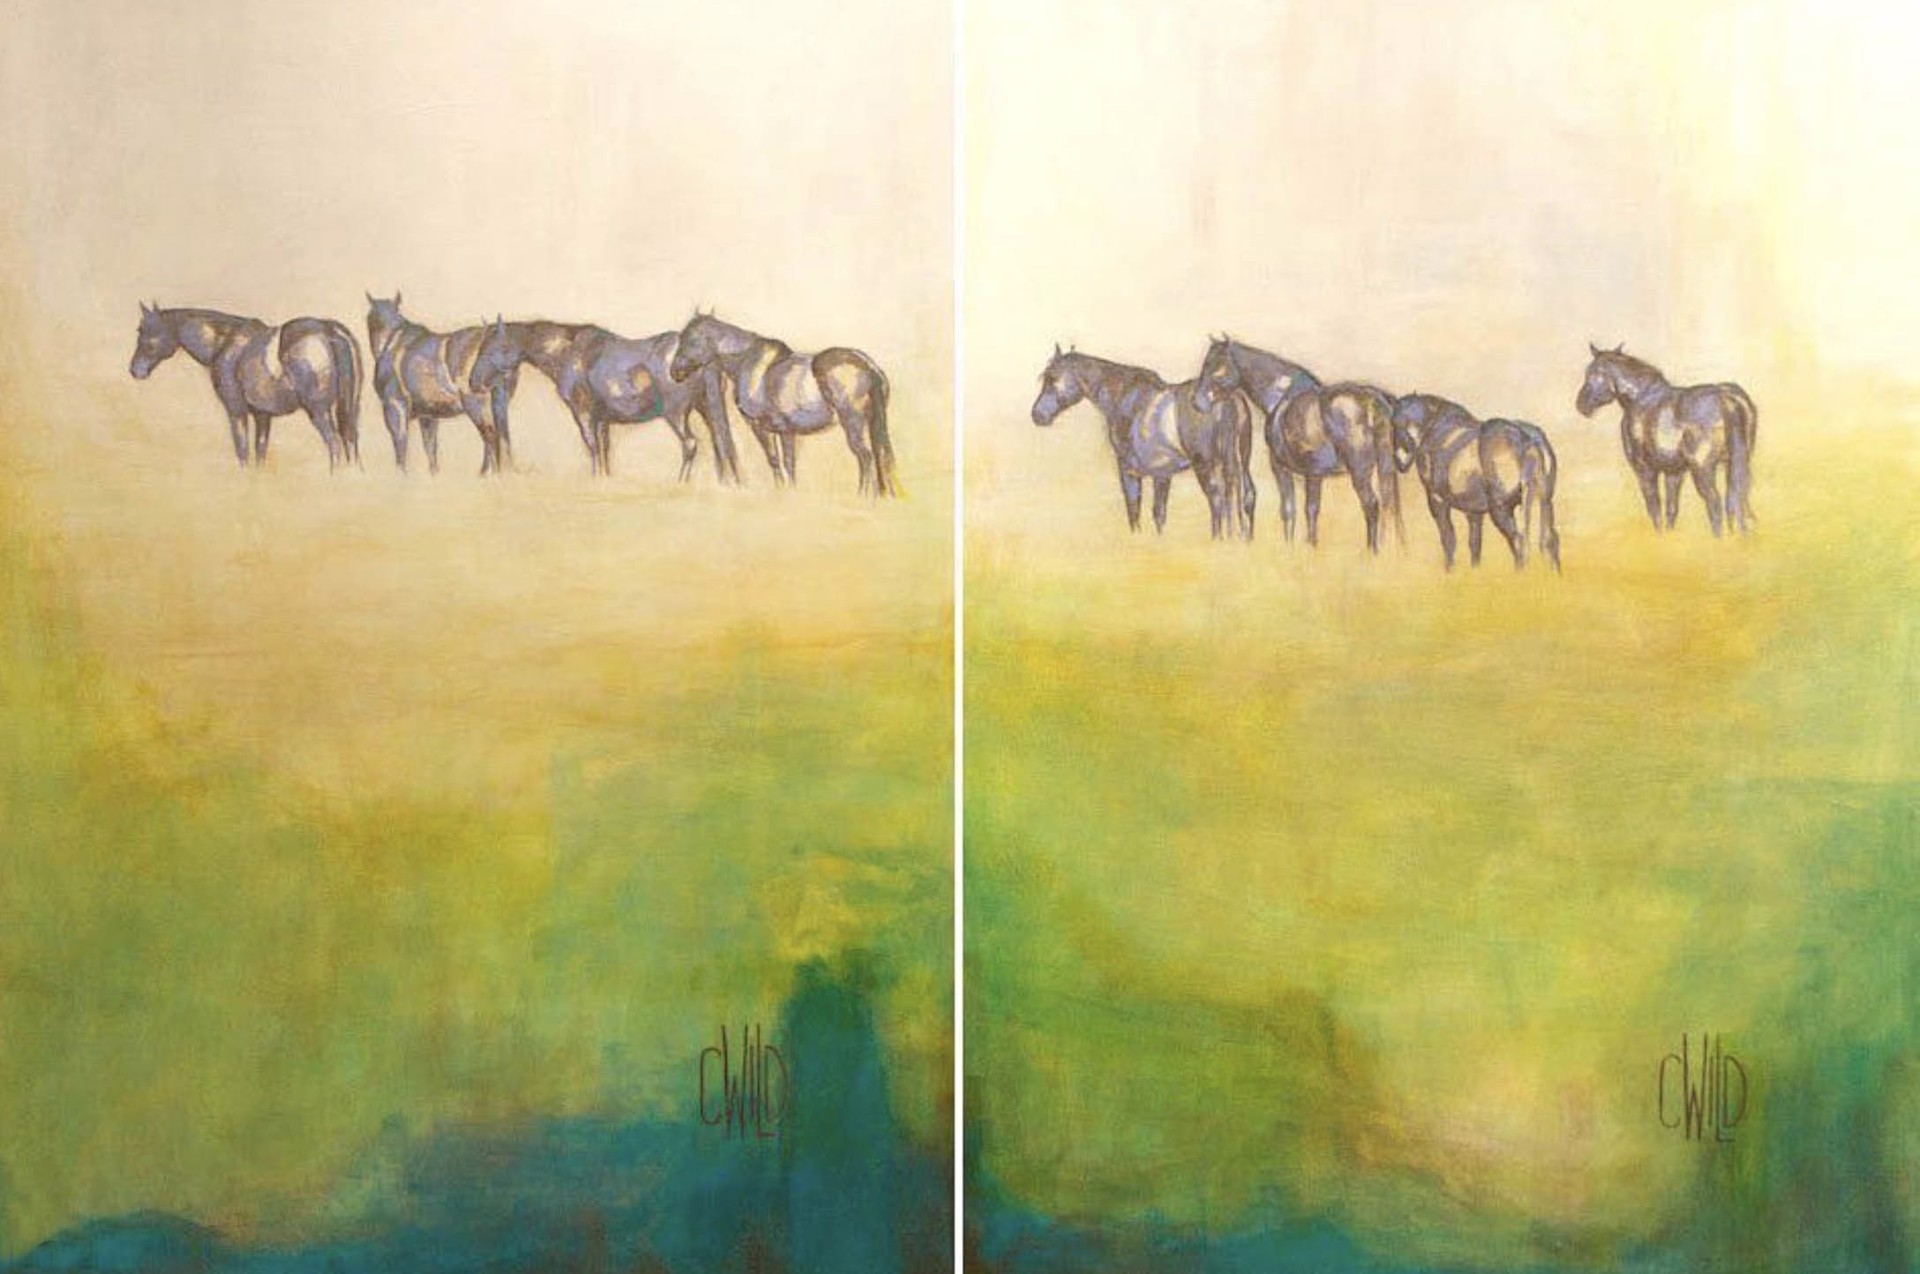 Original Painting Featuring A Herd Of Wild Horses Over Abstracted Landscape In Greens